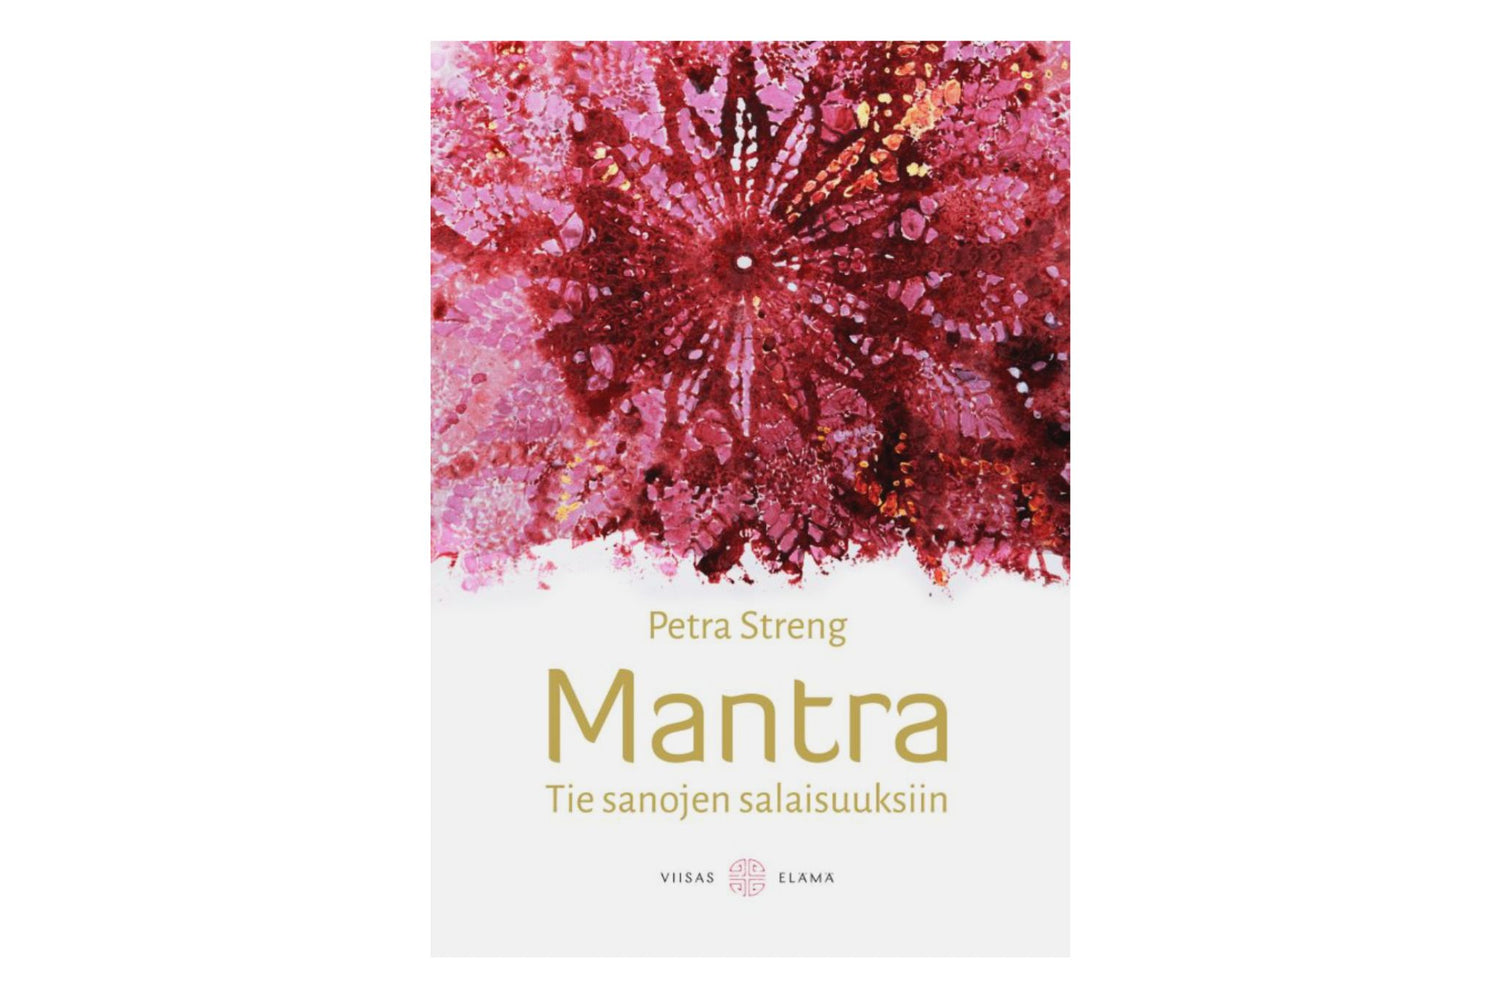 Mantra - a way to the secrets of words